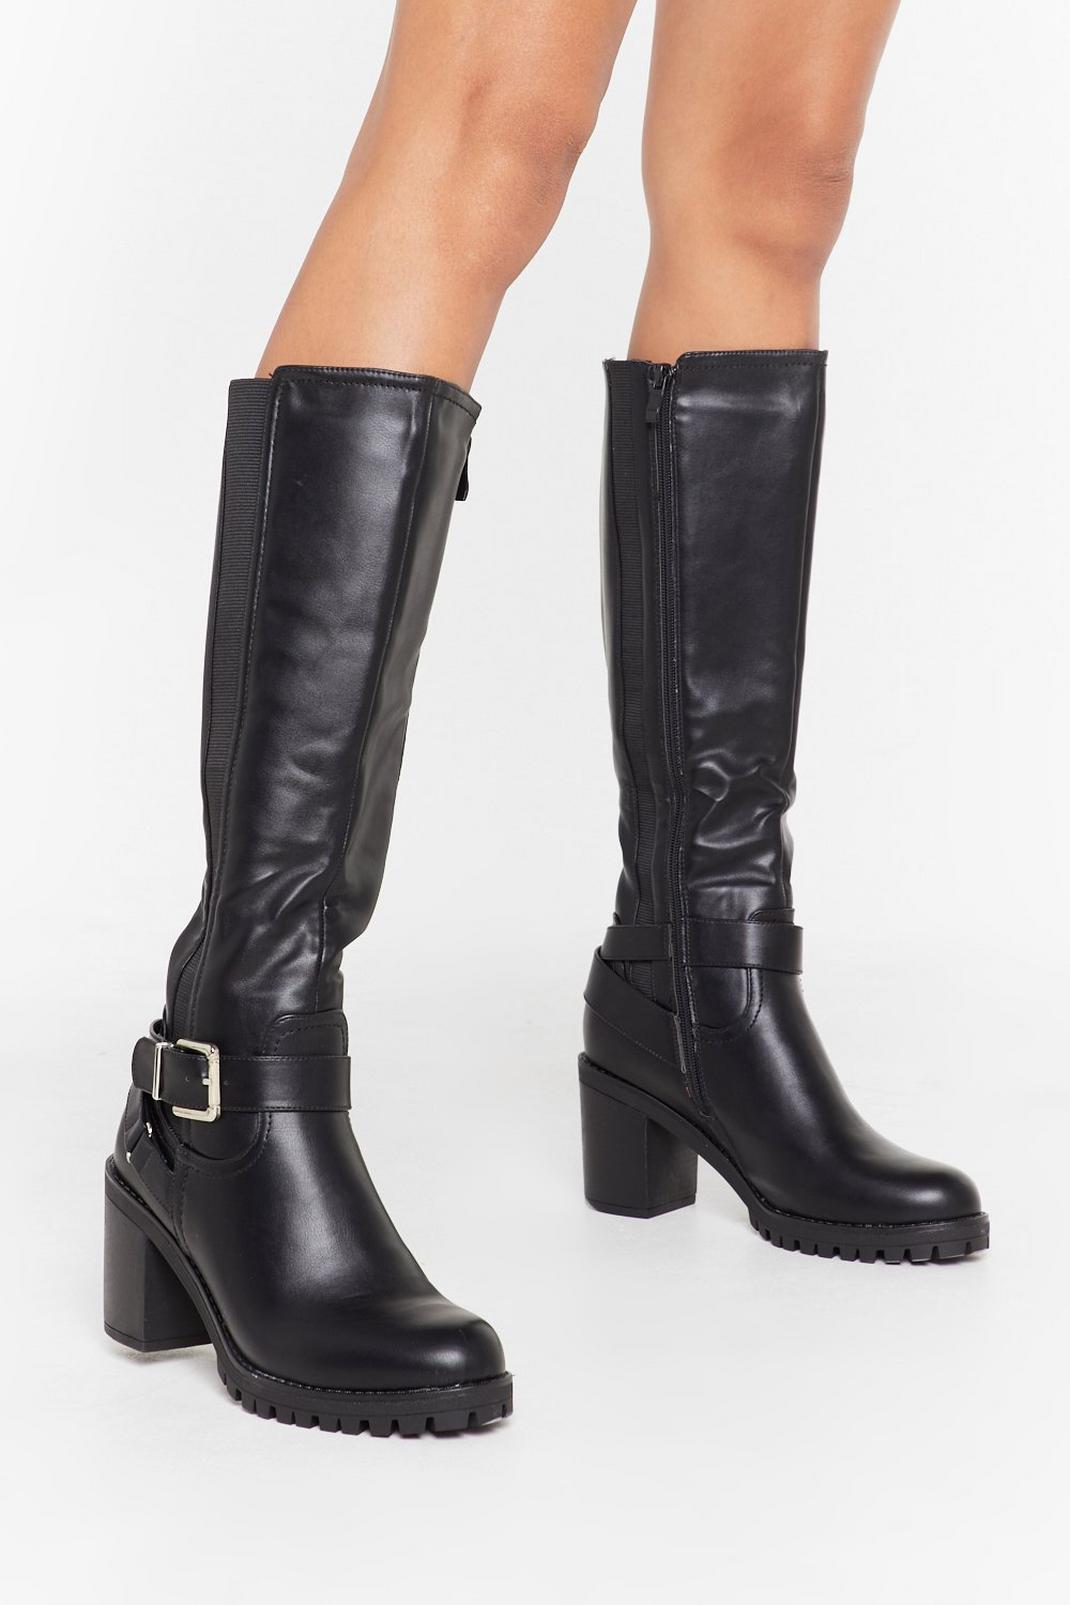 We Don't Give a Buck-le Faux Leather Knee-High Boots image number 1